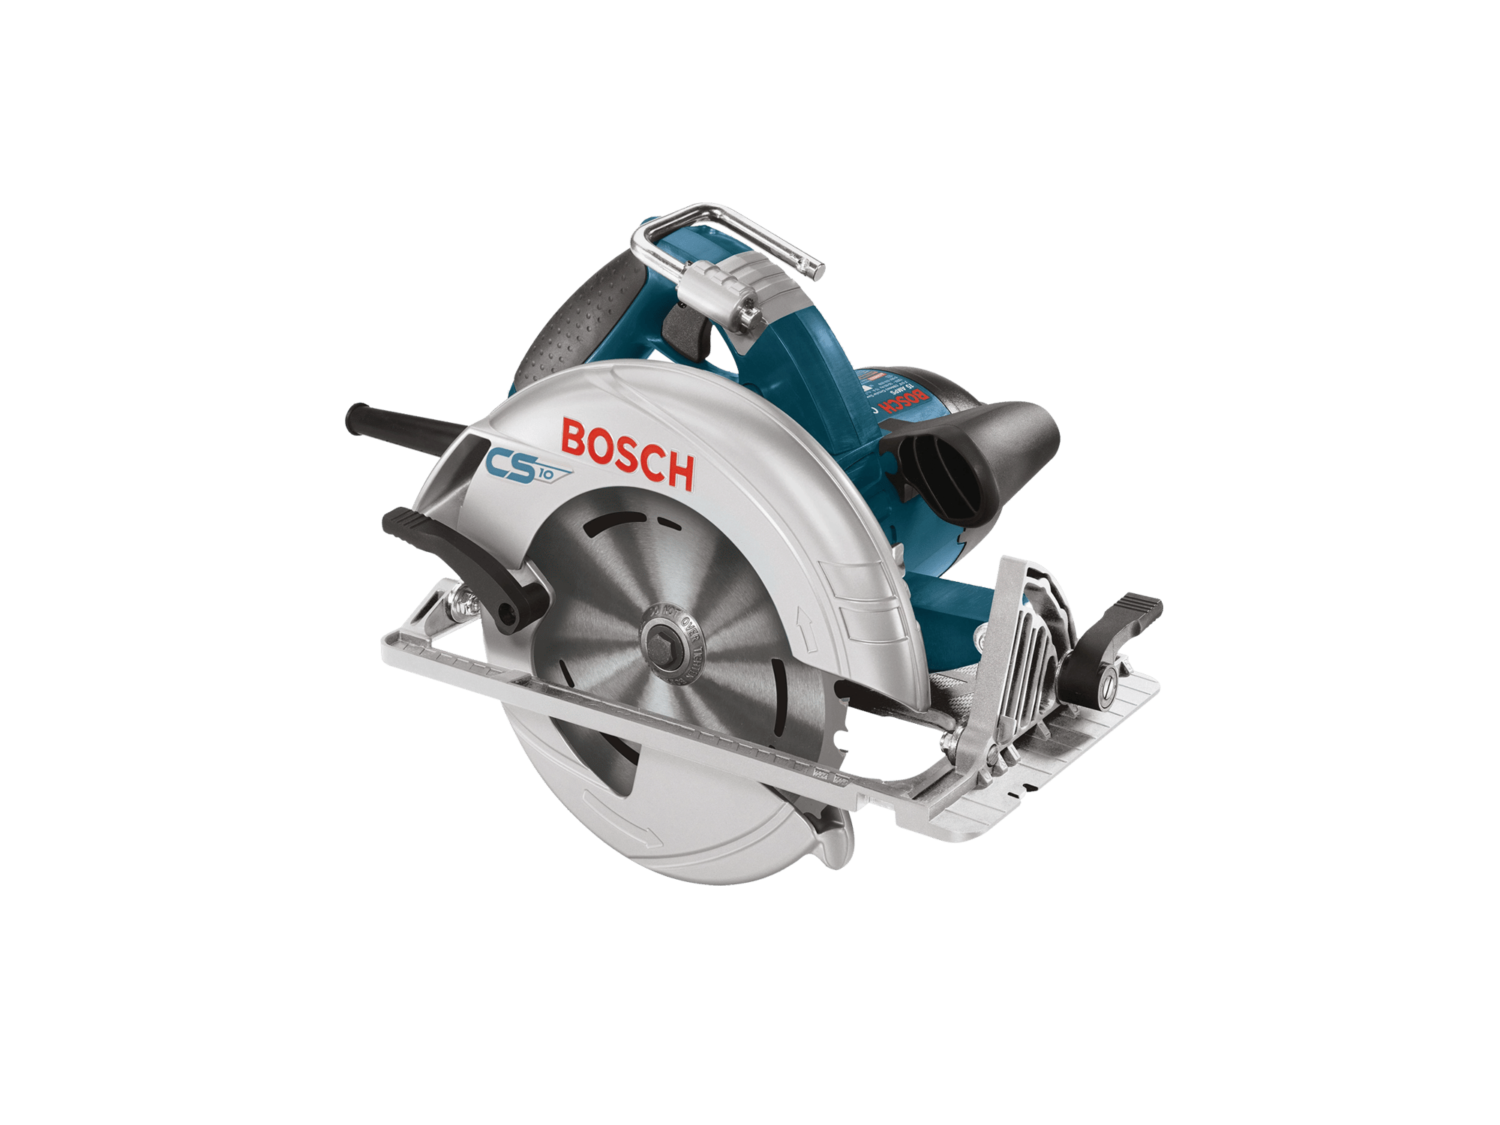 Bosch saw with changes highlighted